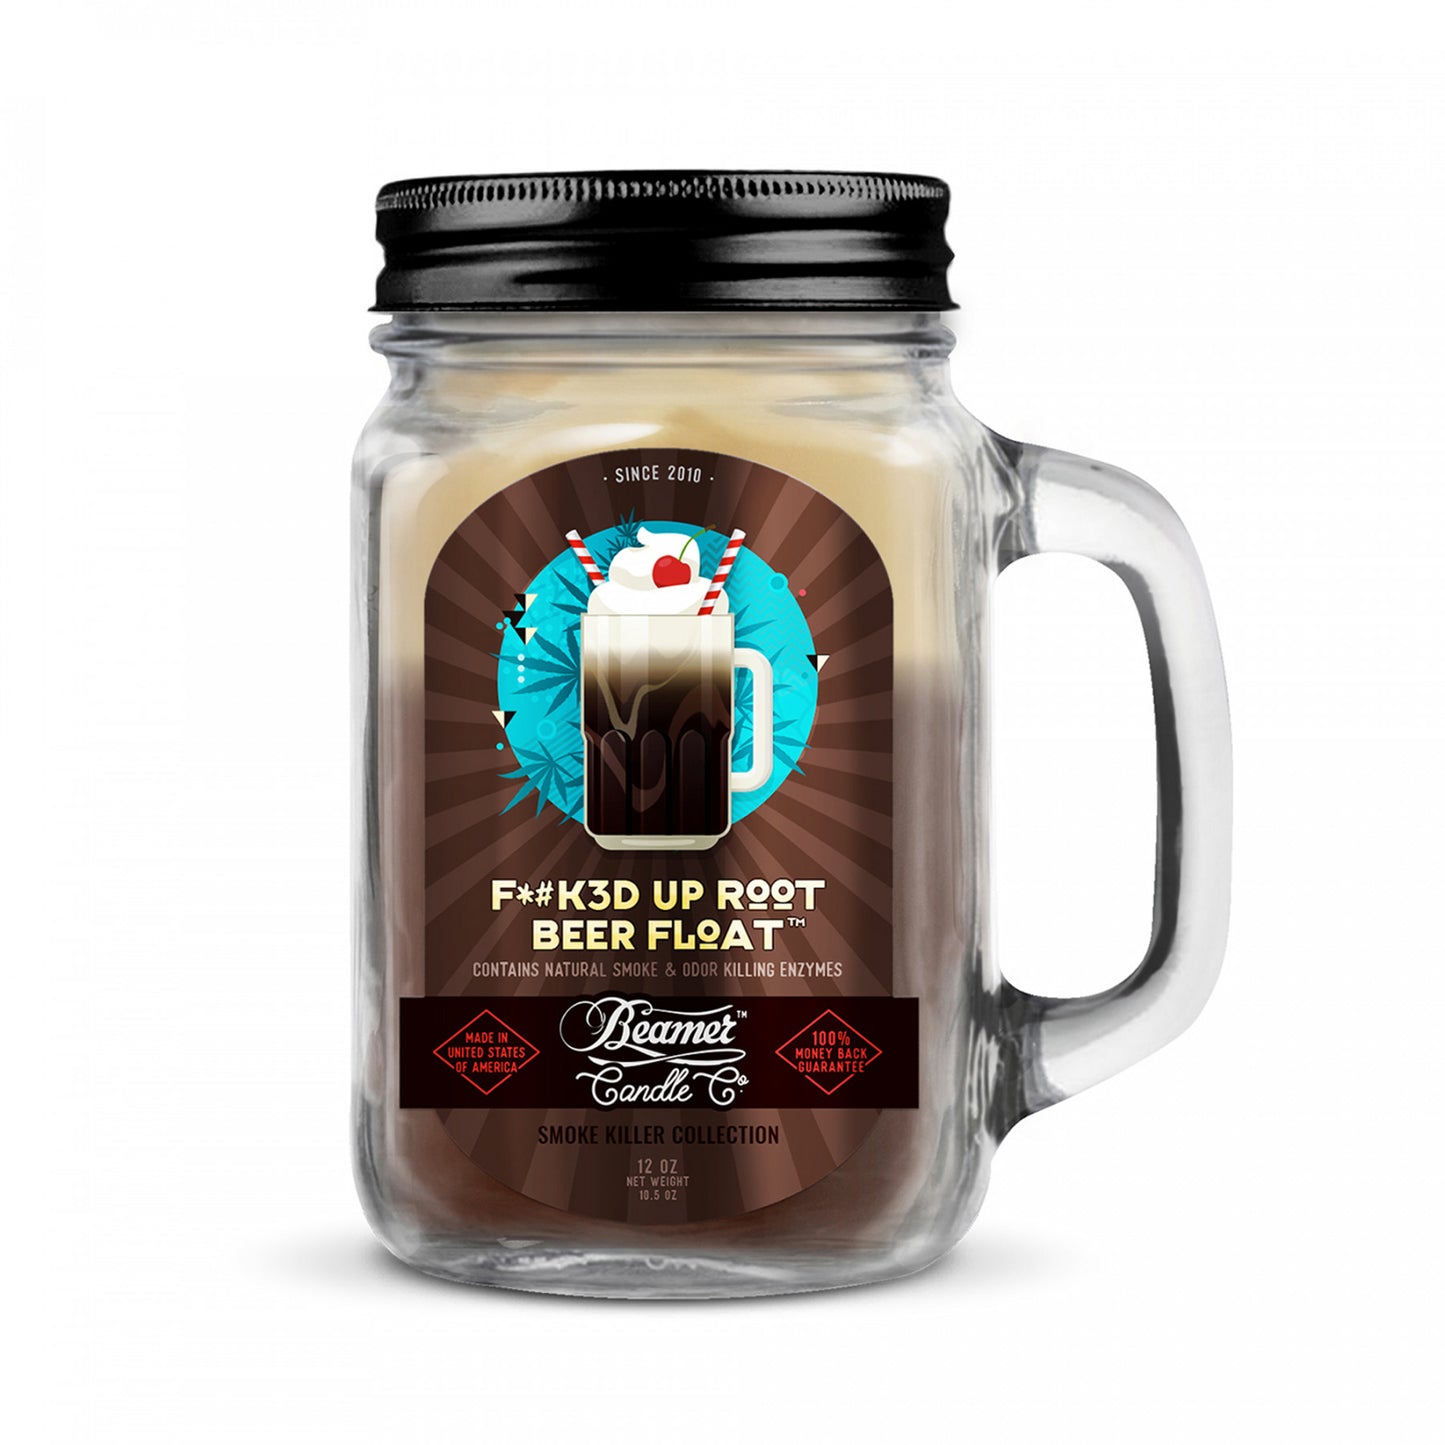 F*#k3d Up Root Beer Candle